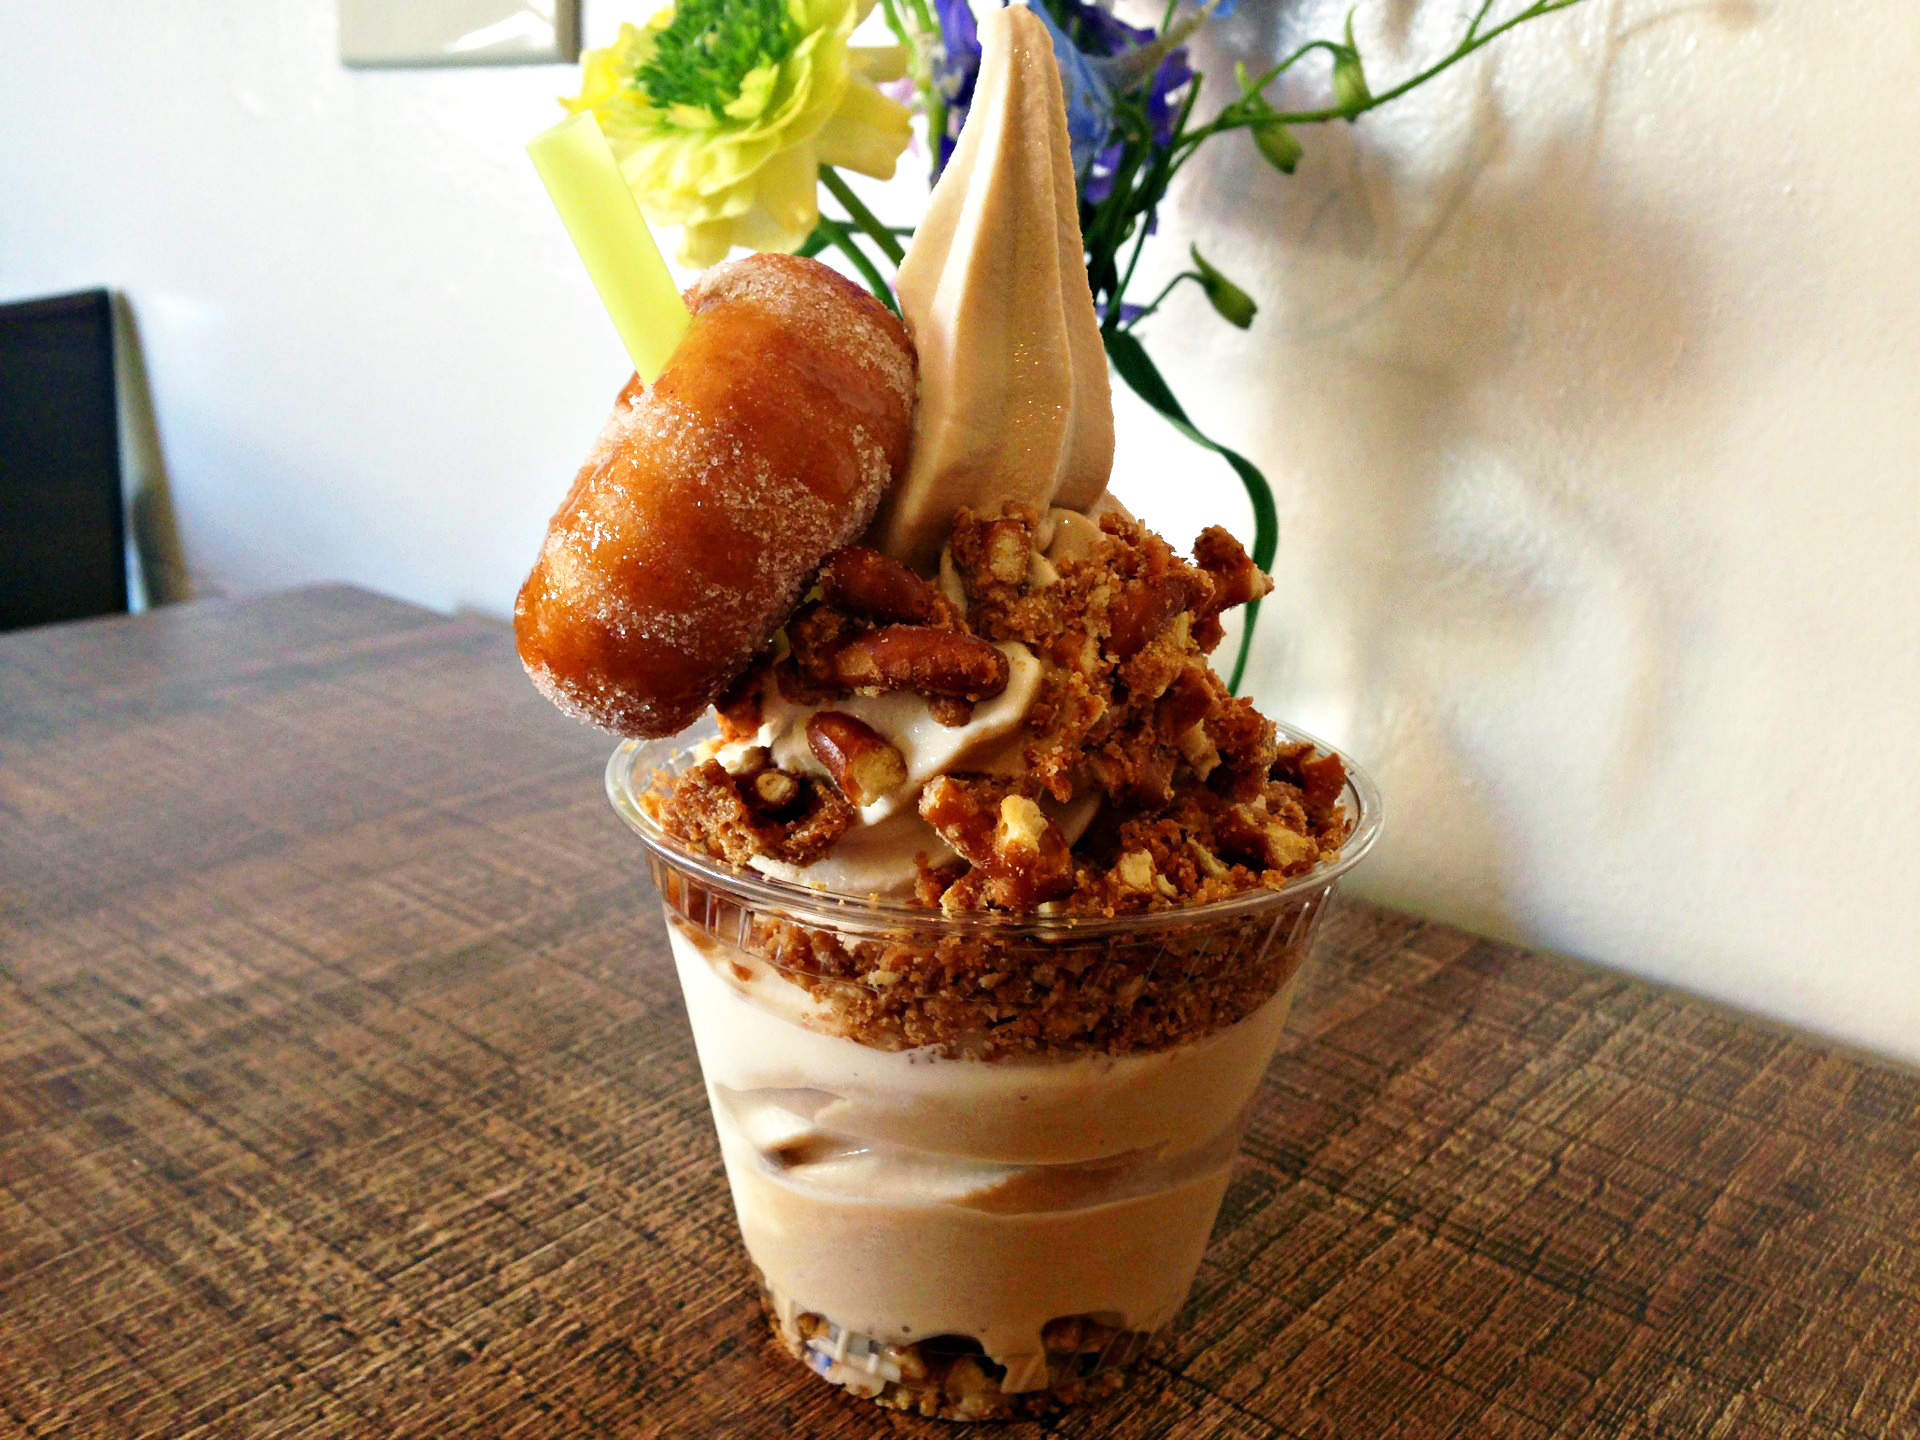 The Sweet Deal, with soft serve, caramel and a donut, from Sweet Belly in Oakland.